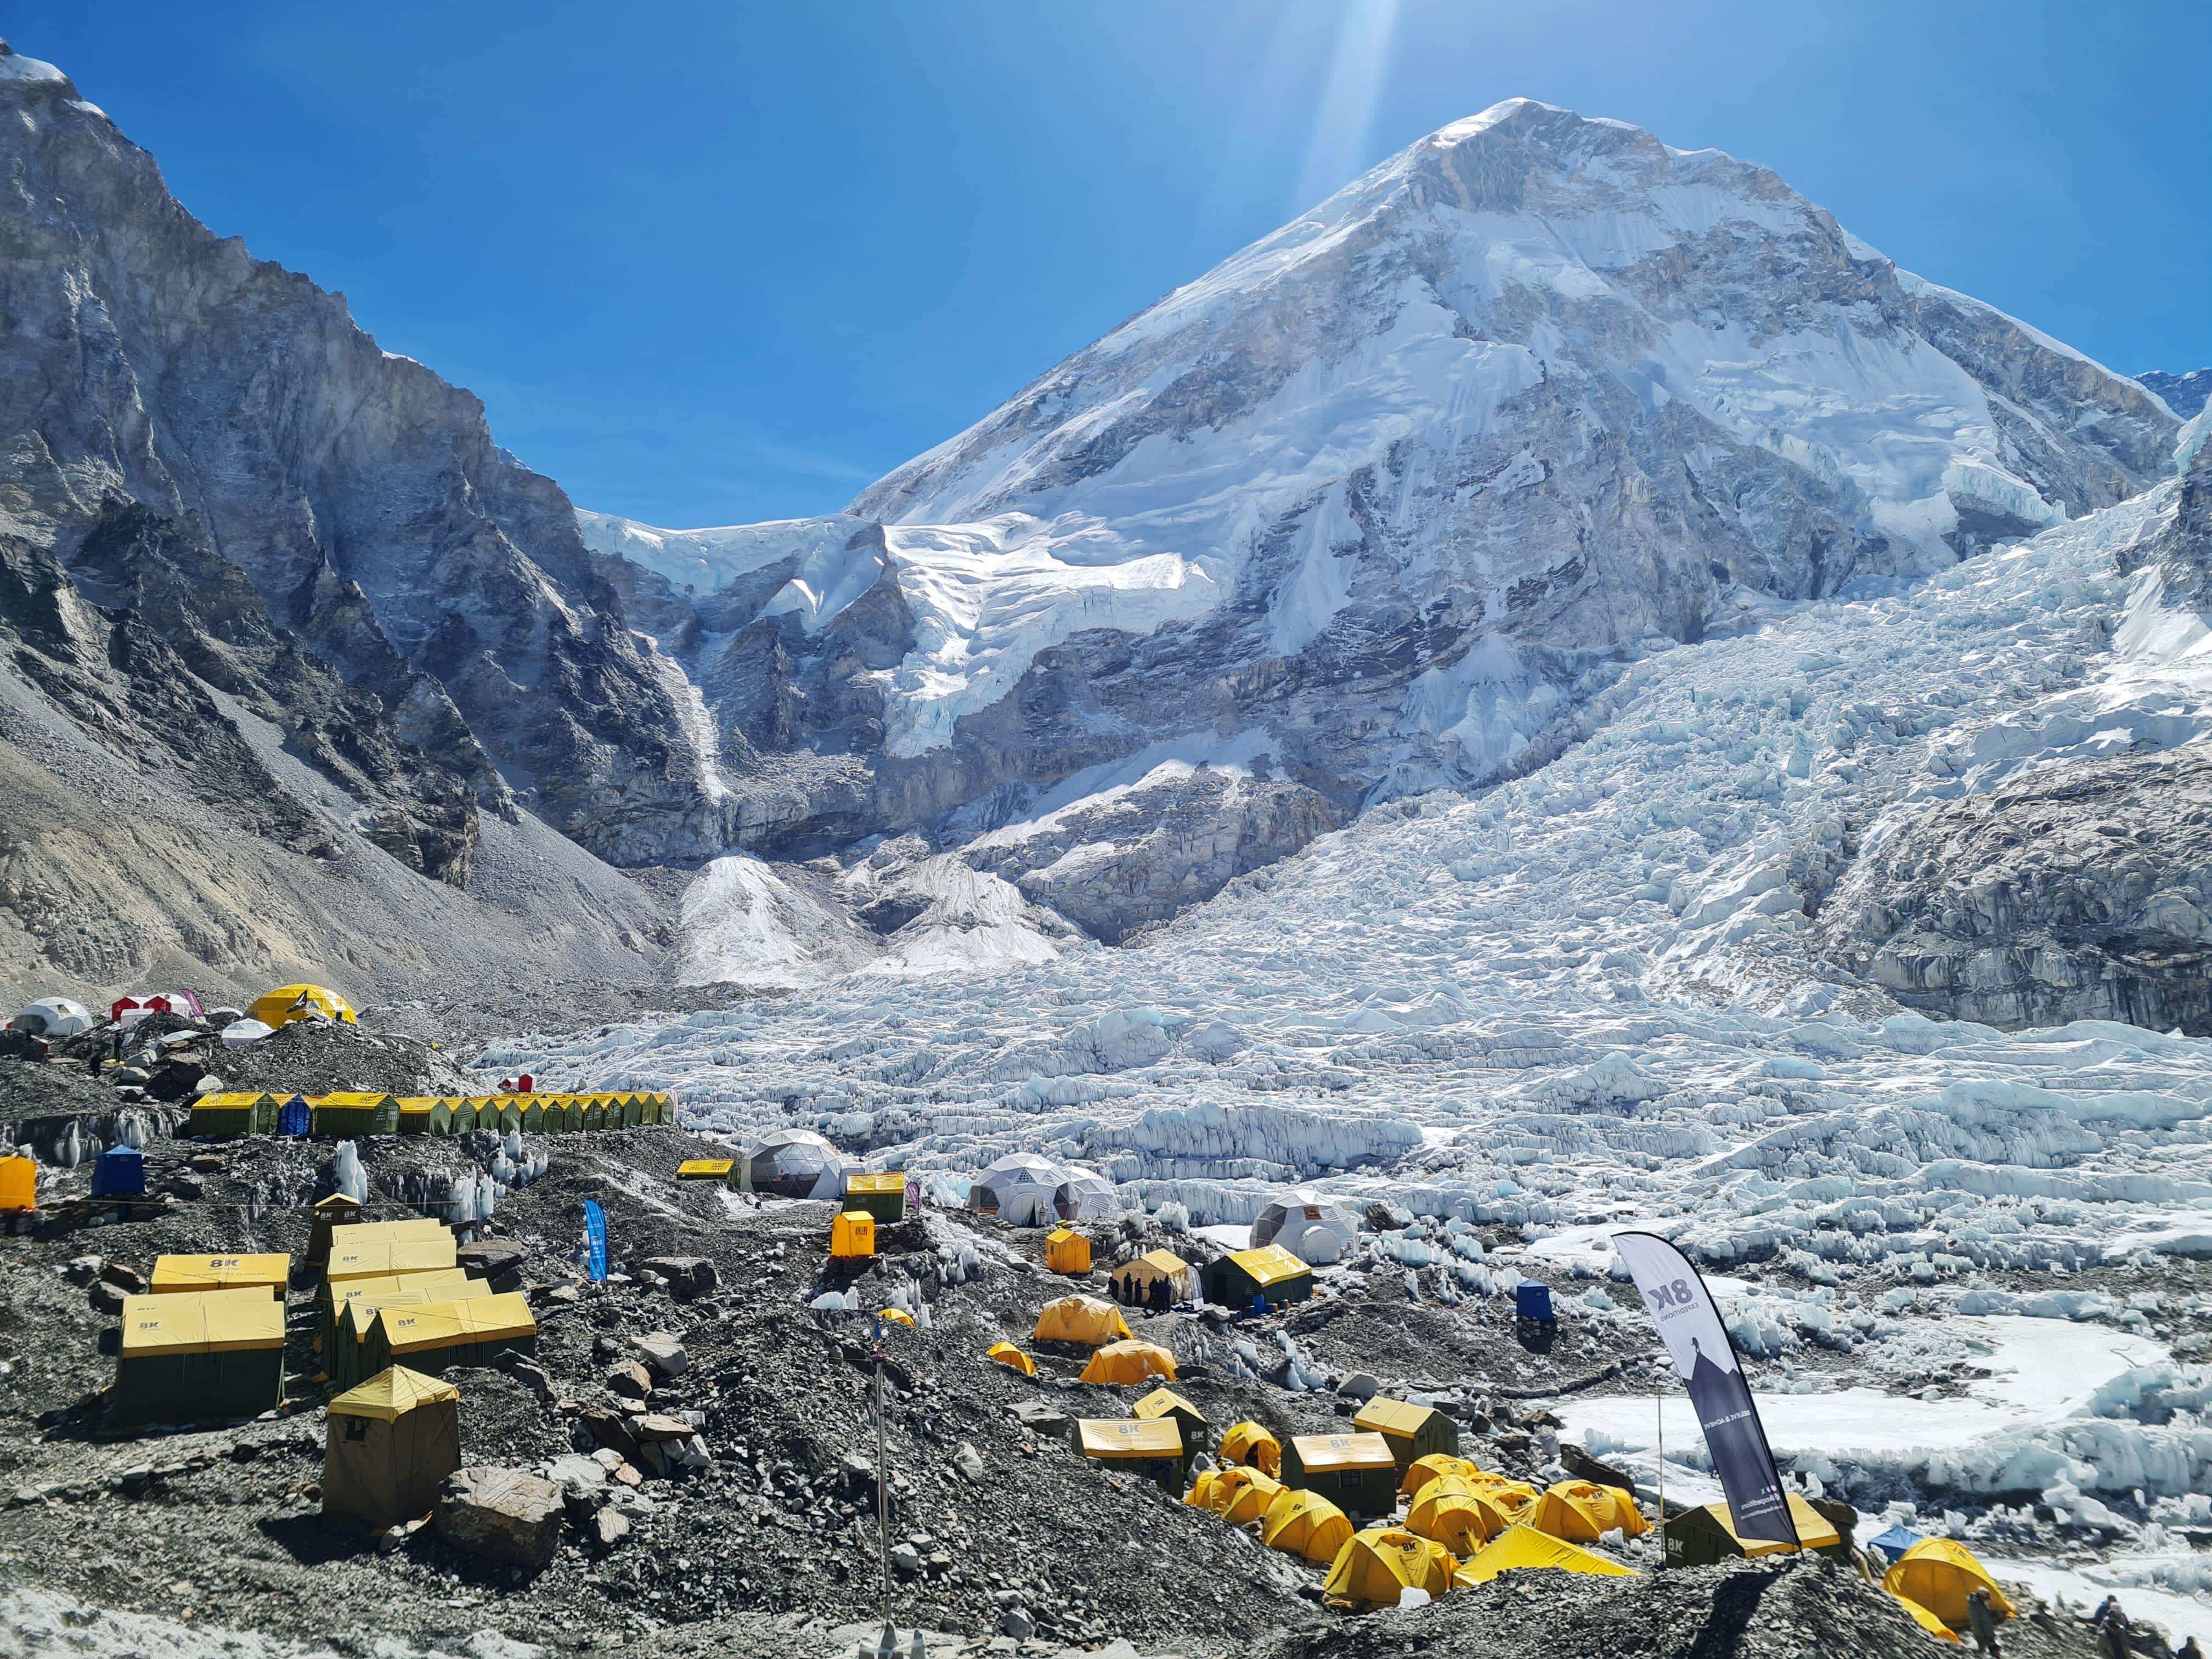 Tents pitched at Everest base camp in Nepal. Photo: AFP